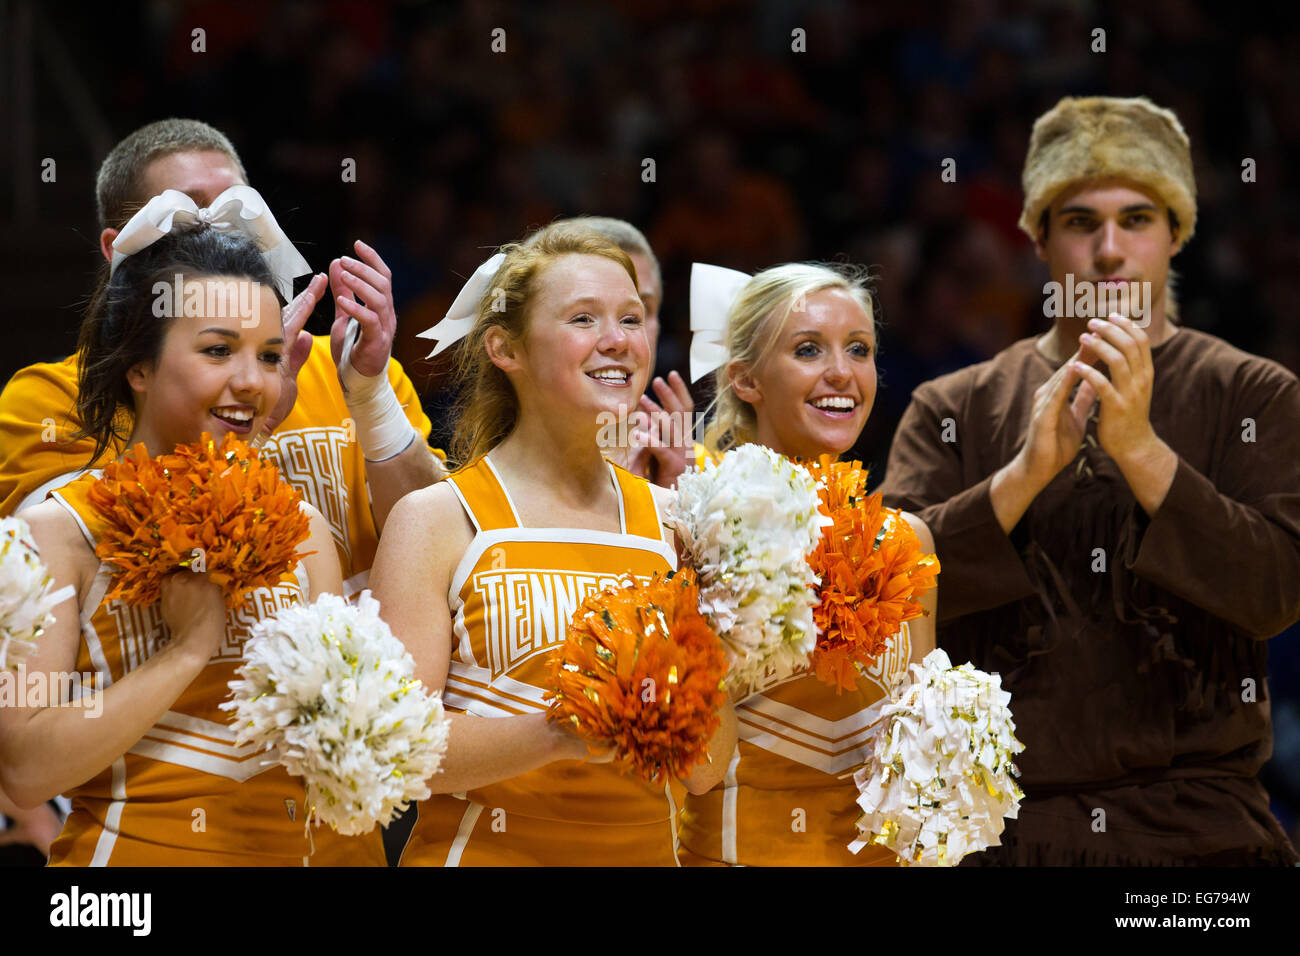 February 17, 2015: Tennessee Volunteers cheerleaders during the NCAA basketball game between the University of Tennessee Volunteers and the University of Kentucky Wildcats at Thompson Boling Arena in Knoxville TN Stock Photo